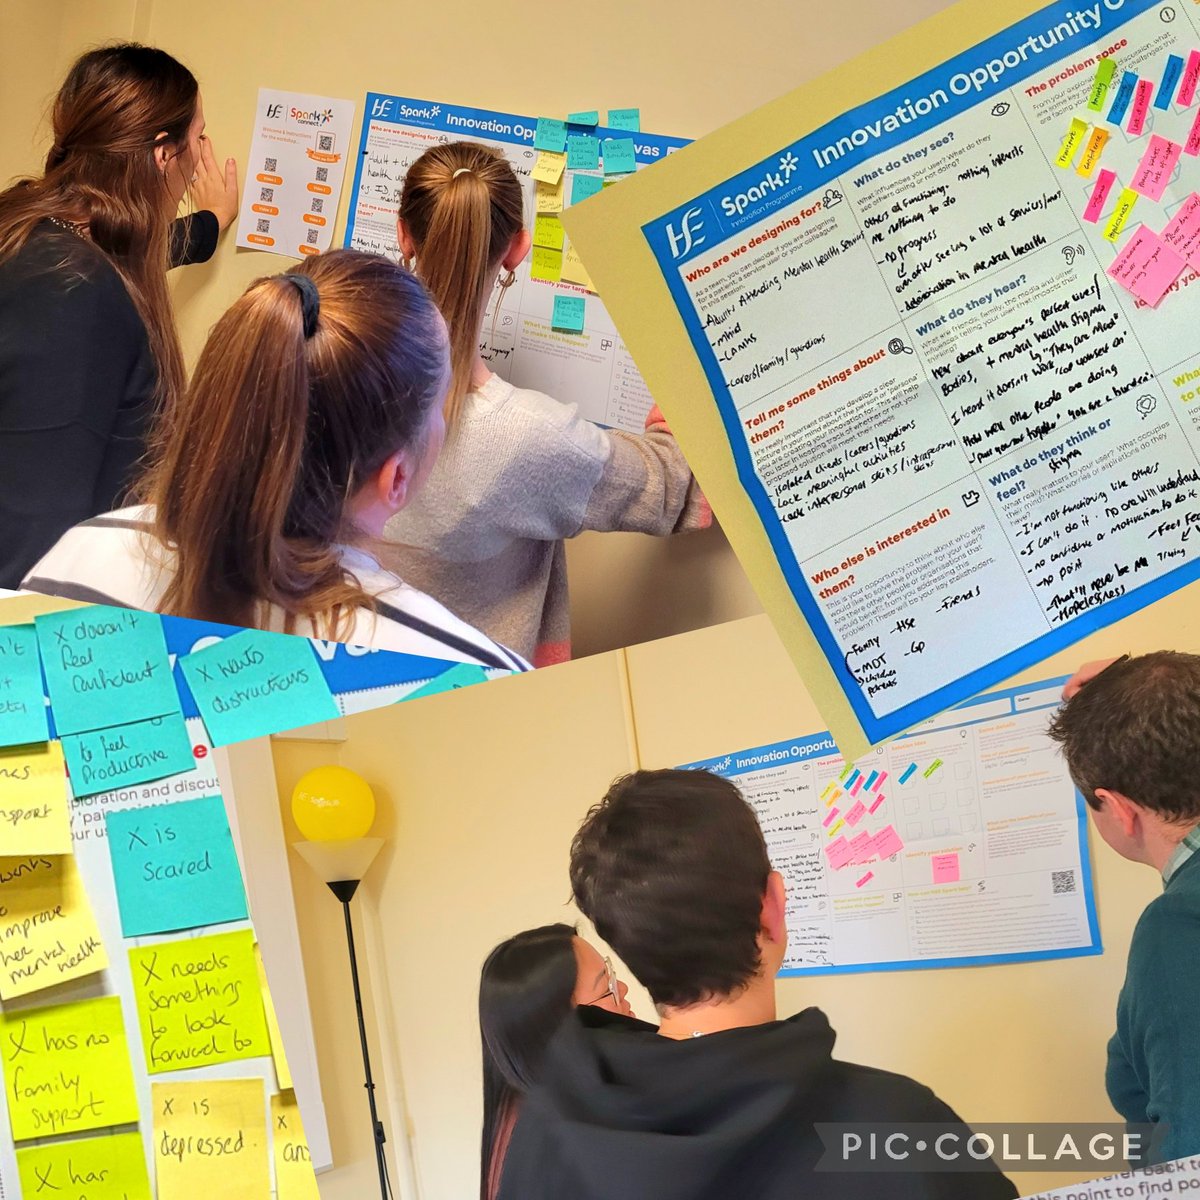 A busy day of creative brainstorming with my OT colleagues as part of our HSE Spark Connect day with @ProgrammeSpark! #SparkConnect